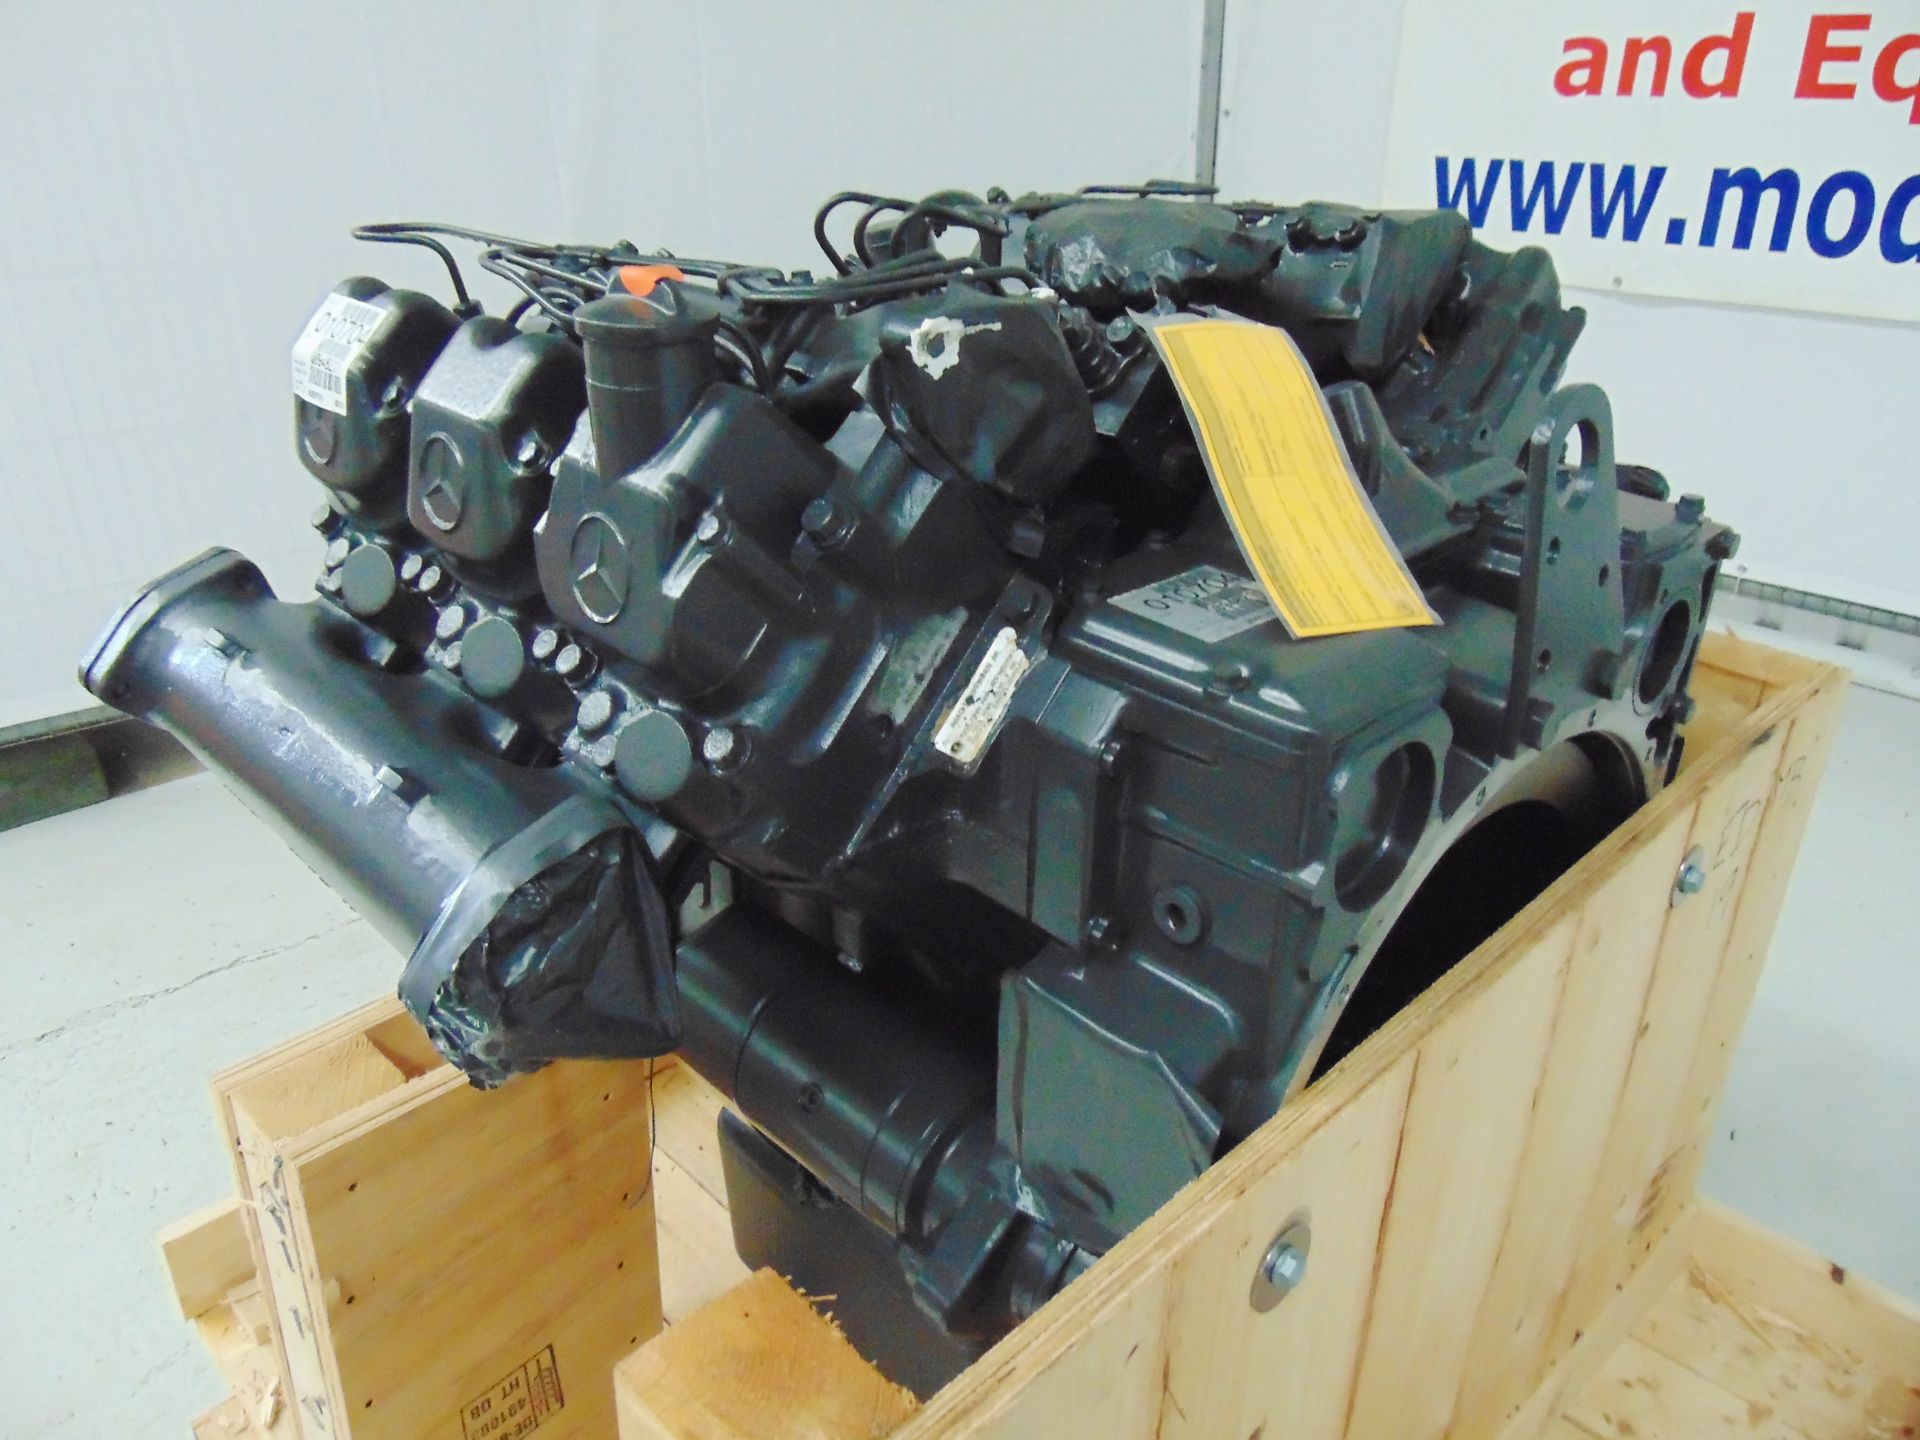 Factory Reconditioned Mercedes-Benz OM441 V6 Turbo Diesel Engine - Image 13 of 14